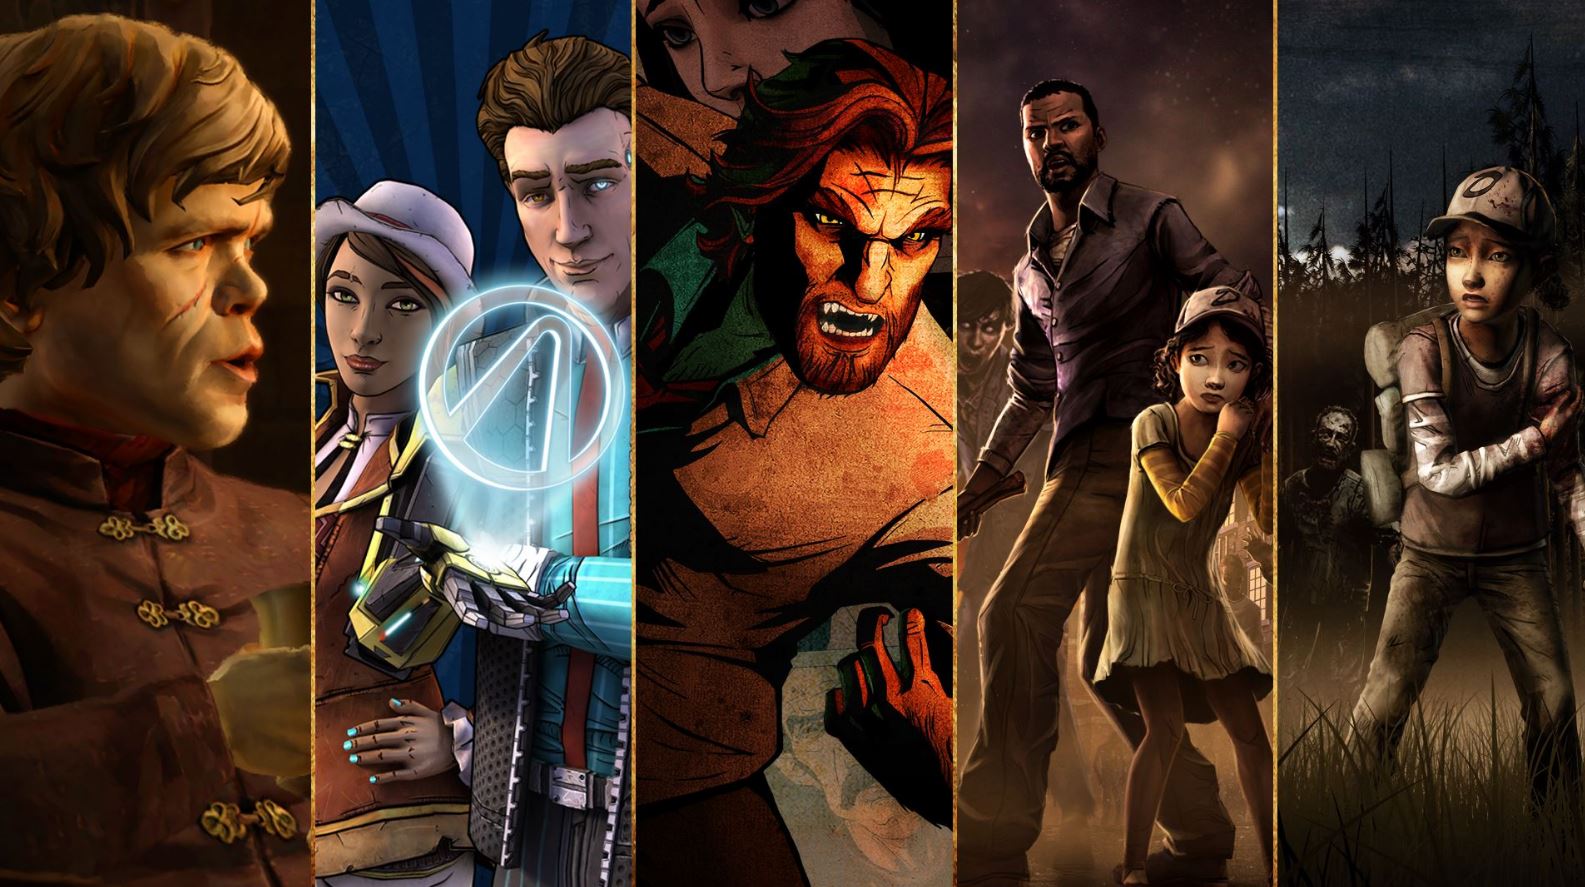 Android Apps by Telltale Games on Google Play